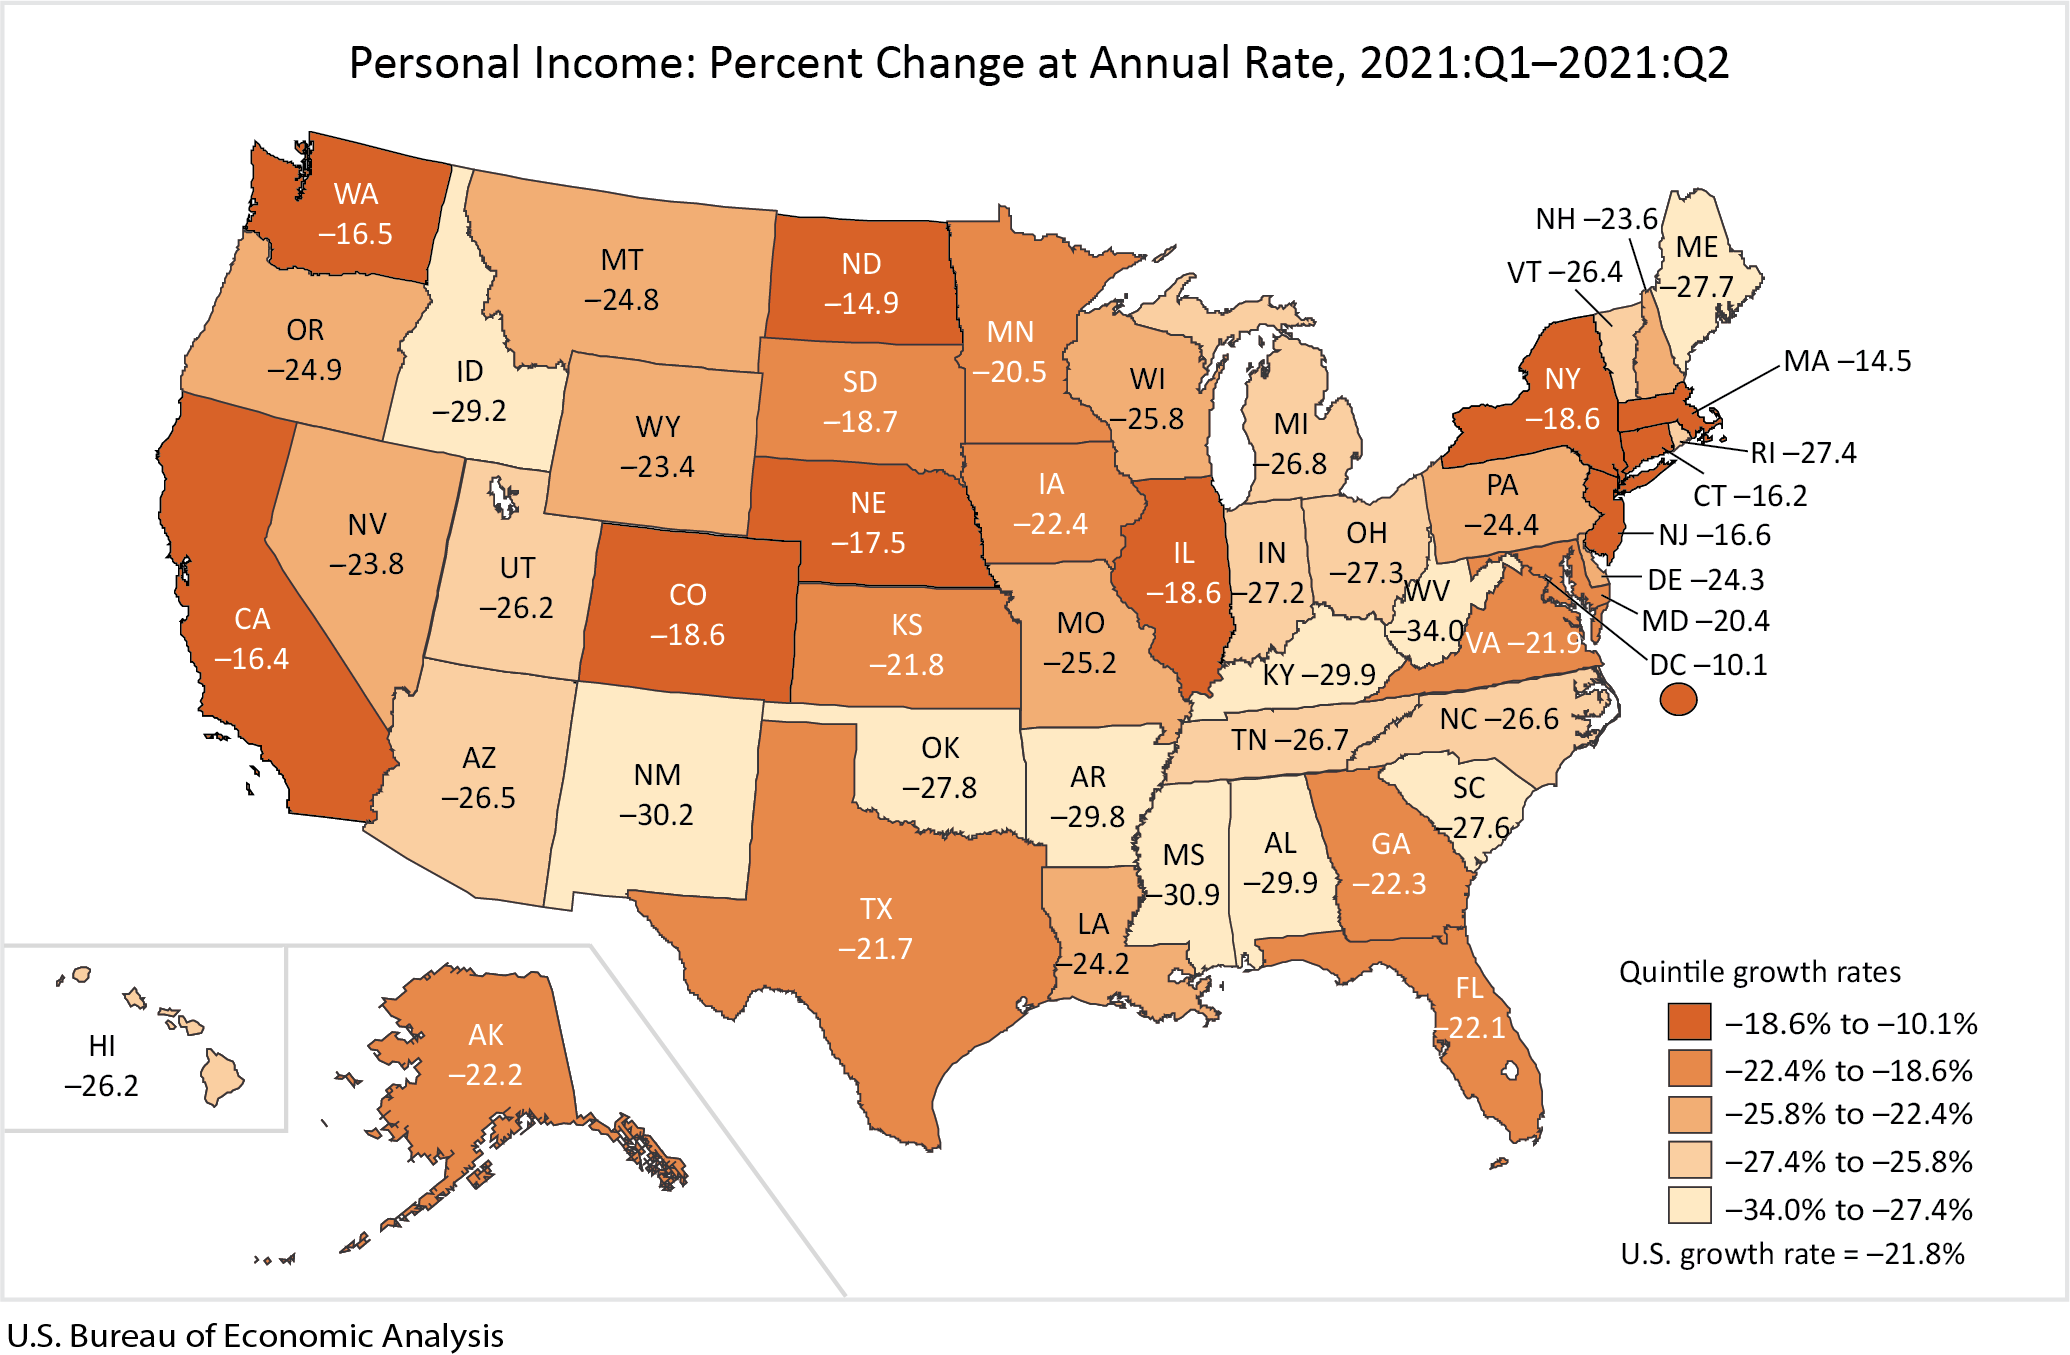 Map: Personal Income: Percent Change at Annual Rate, 2021Q1-2021:Q2